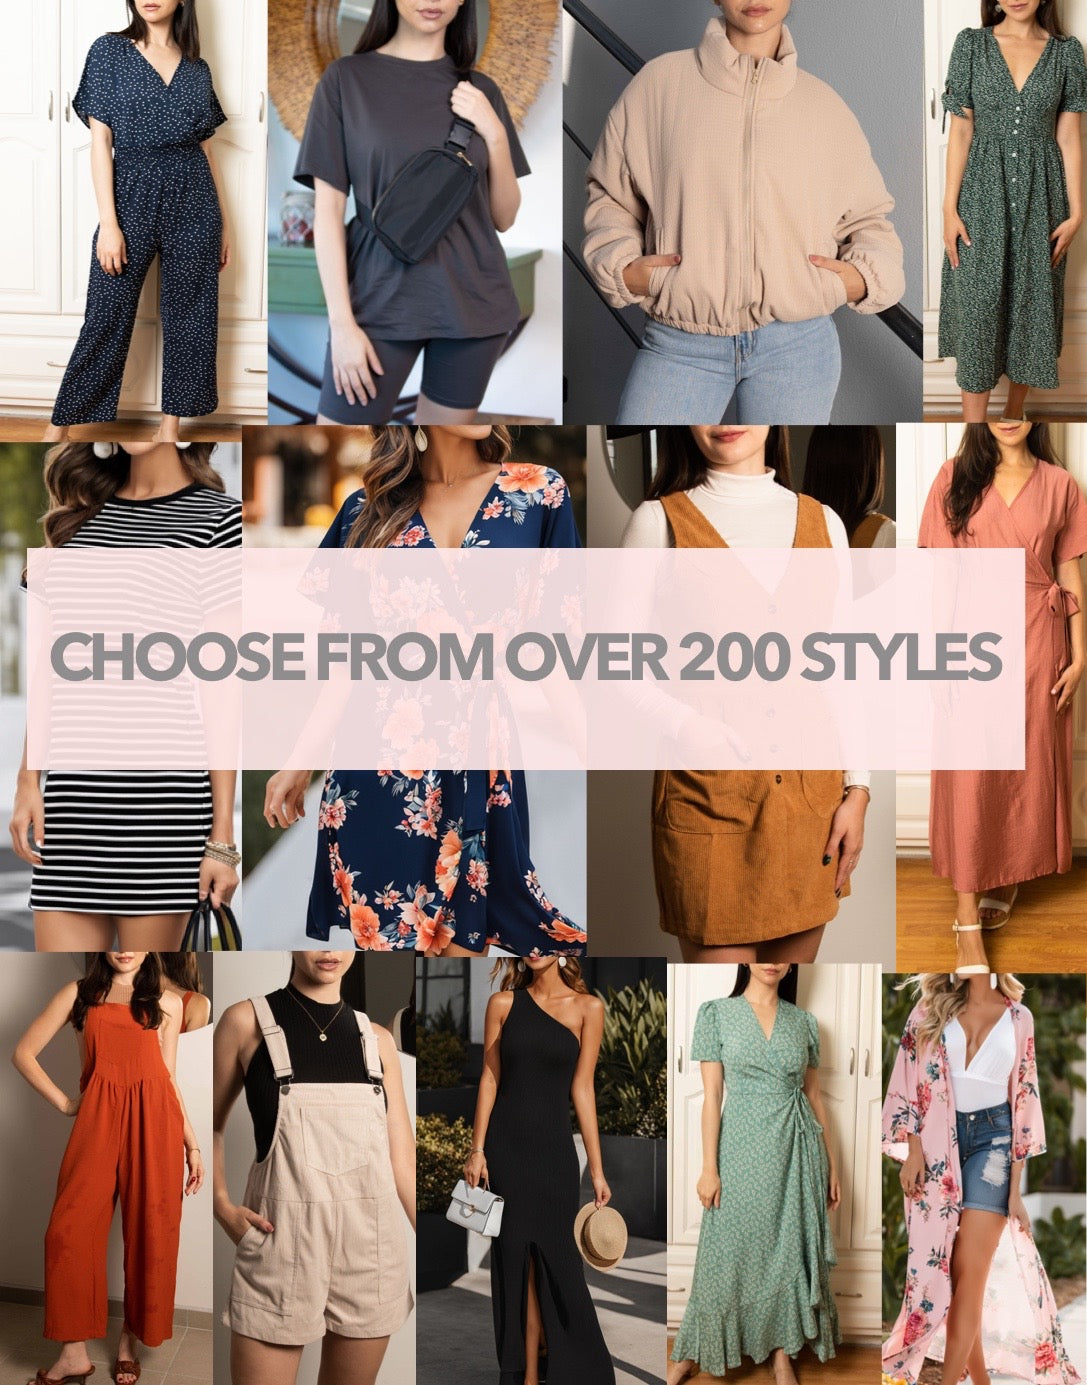 Choose from over 200 styles